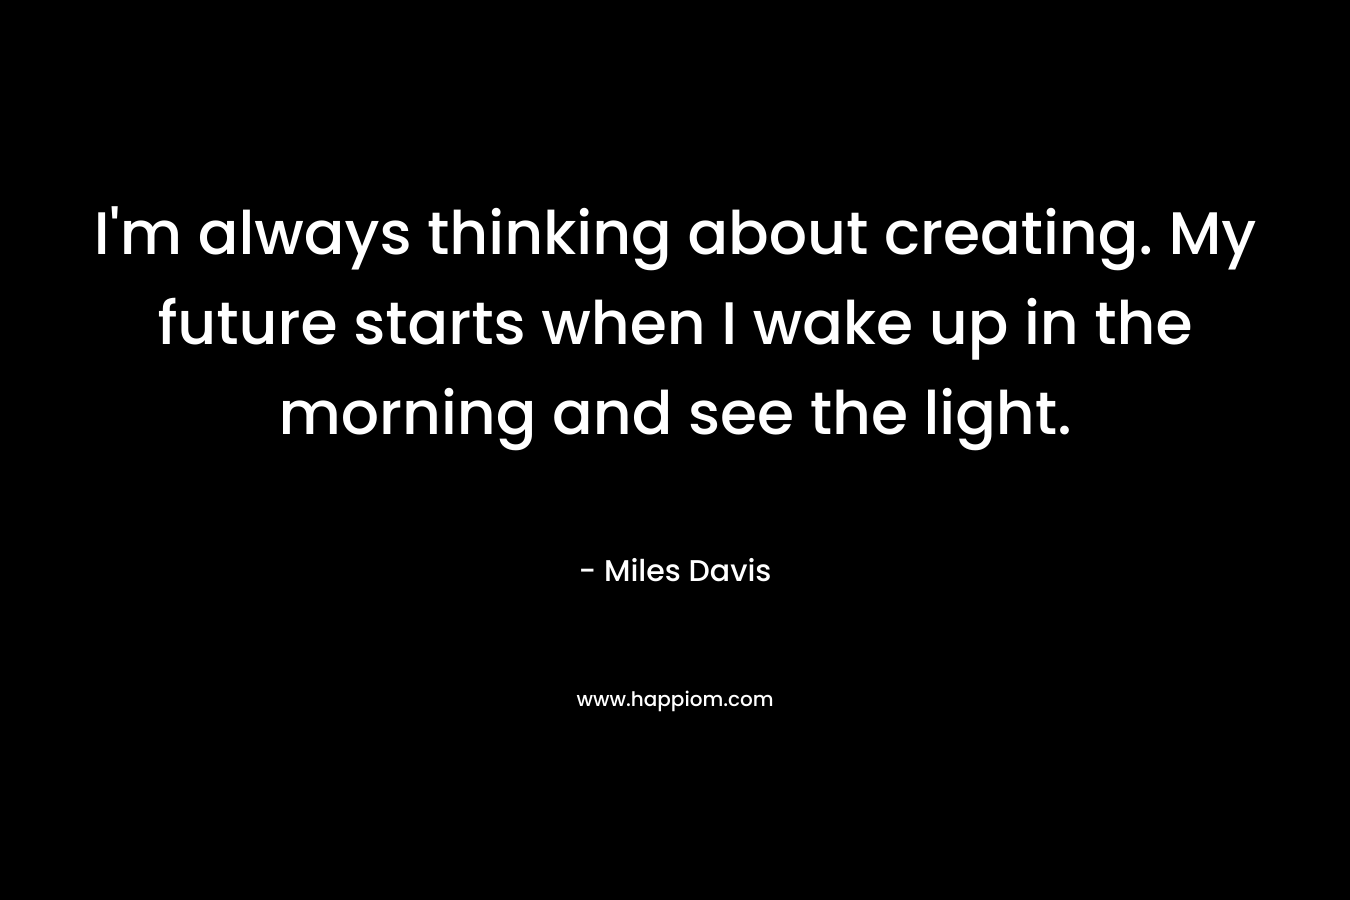 I'm always thinking about creating. My future starts when I wake up in the morning and see the light.